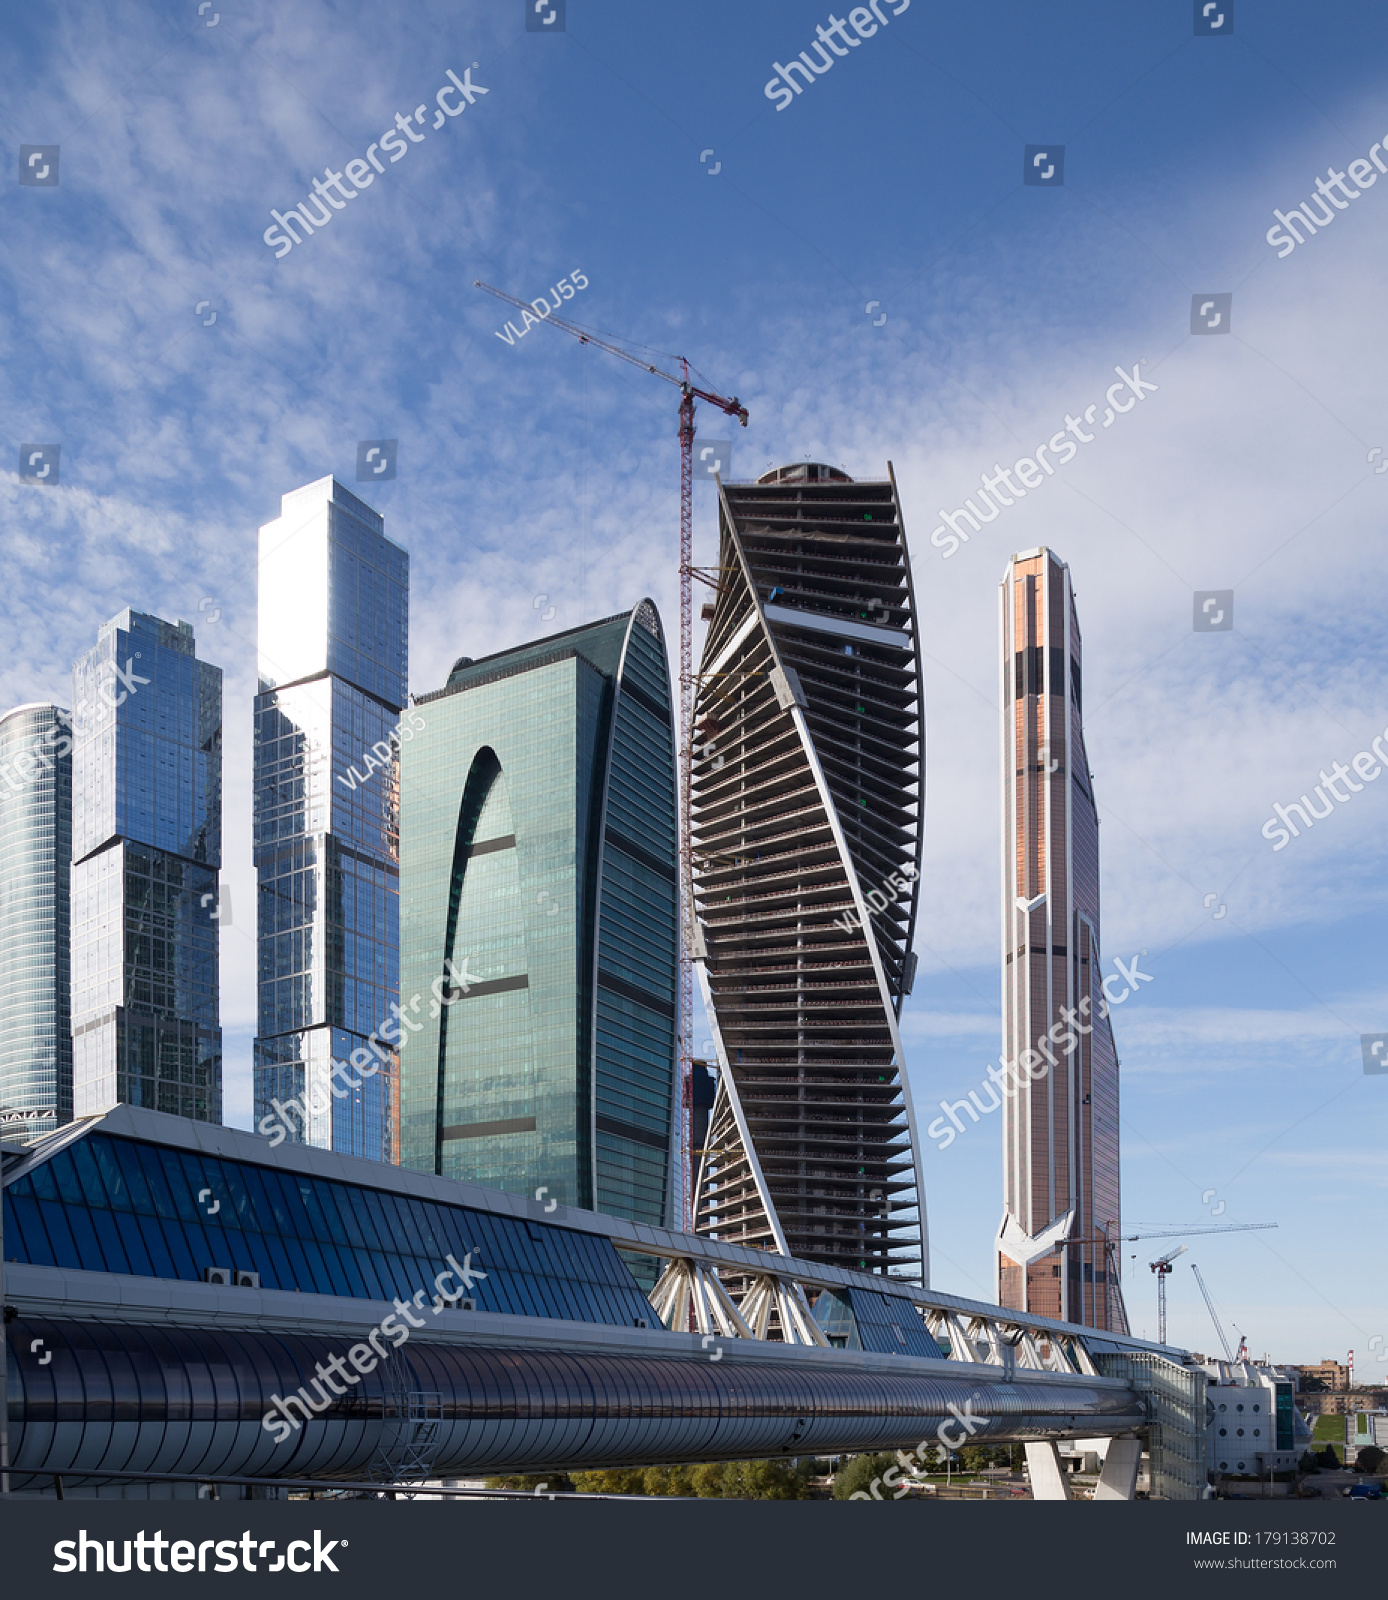 MOSCOW, RUSSIA- OCTOBER 06, 2013: Skyscrapers of the International Business Center (City), Moscow, Russia #179138702